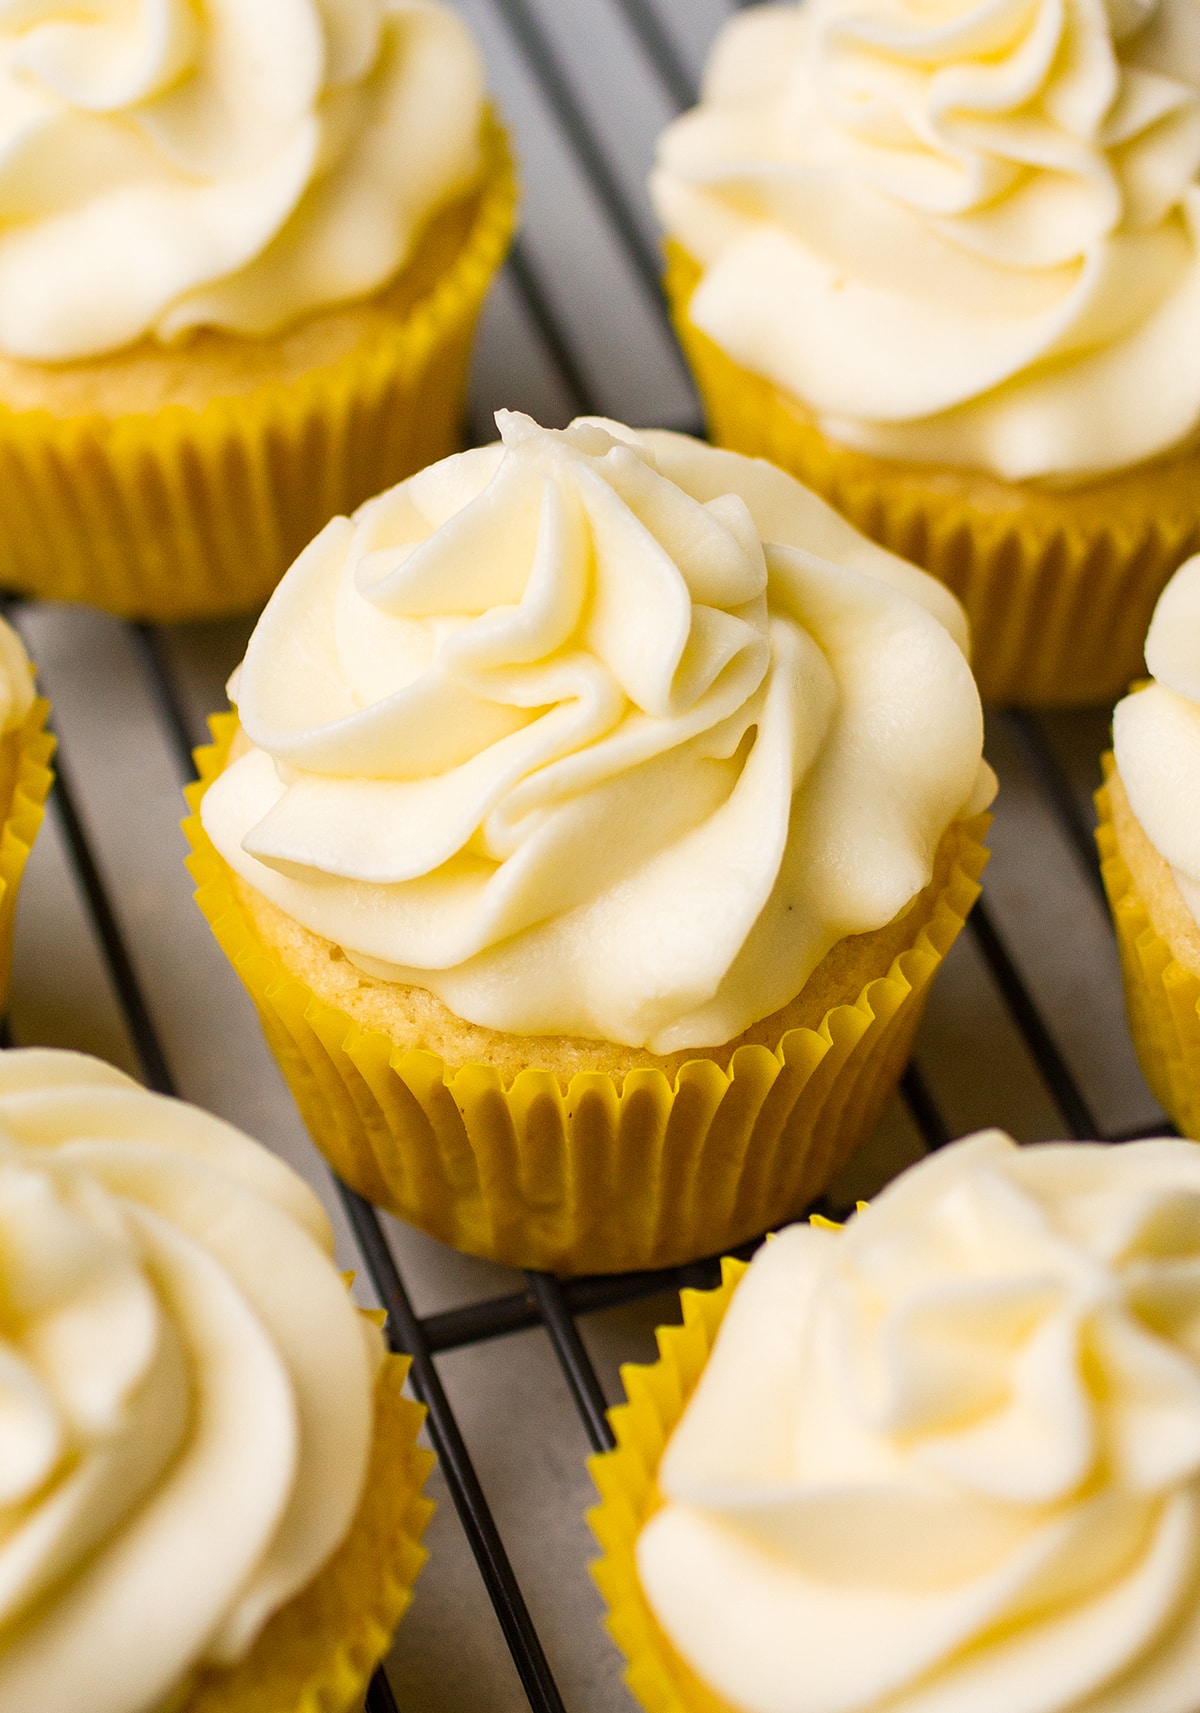 Cupcakes in yellow wrappers, topped with buttercream.